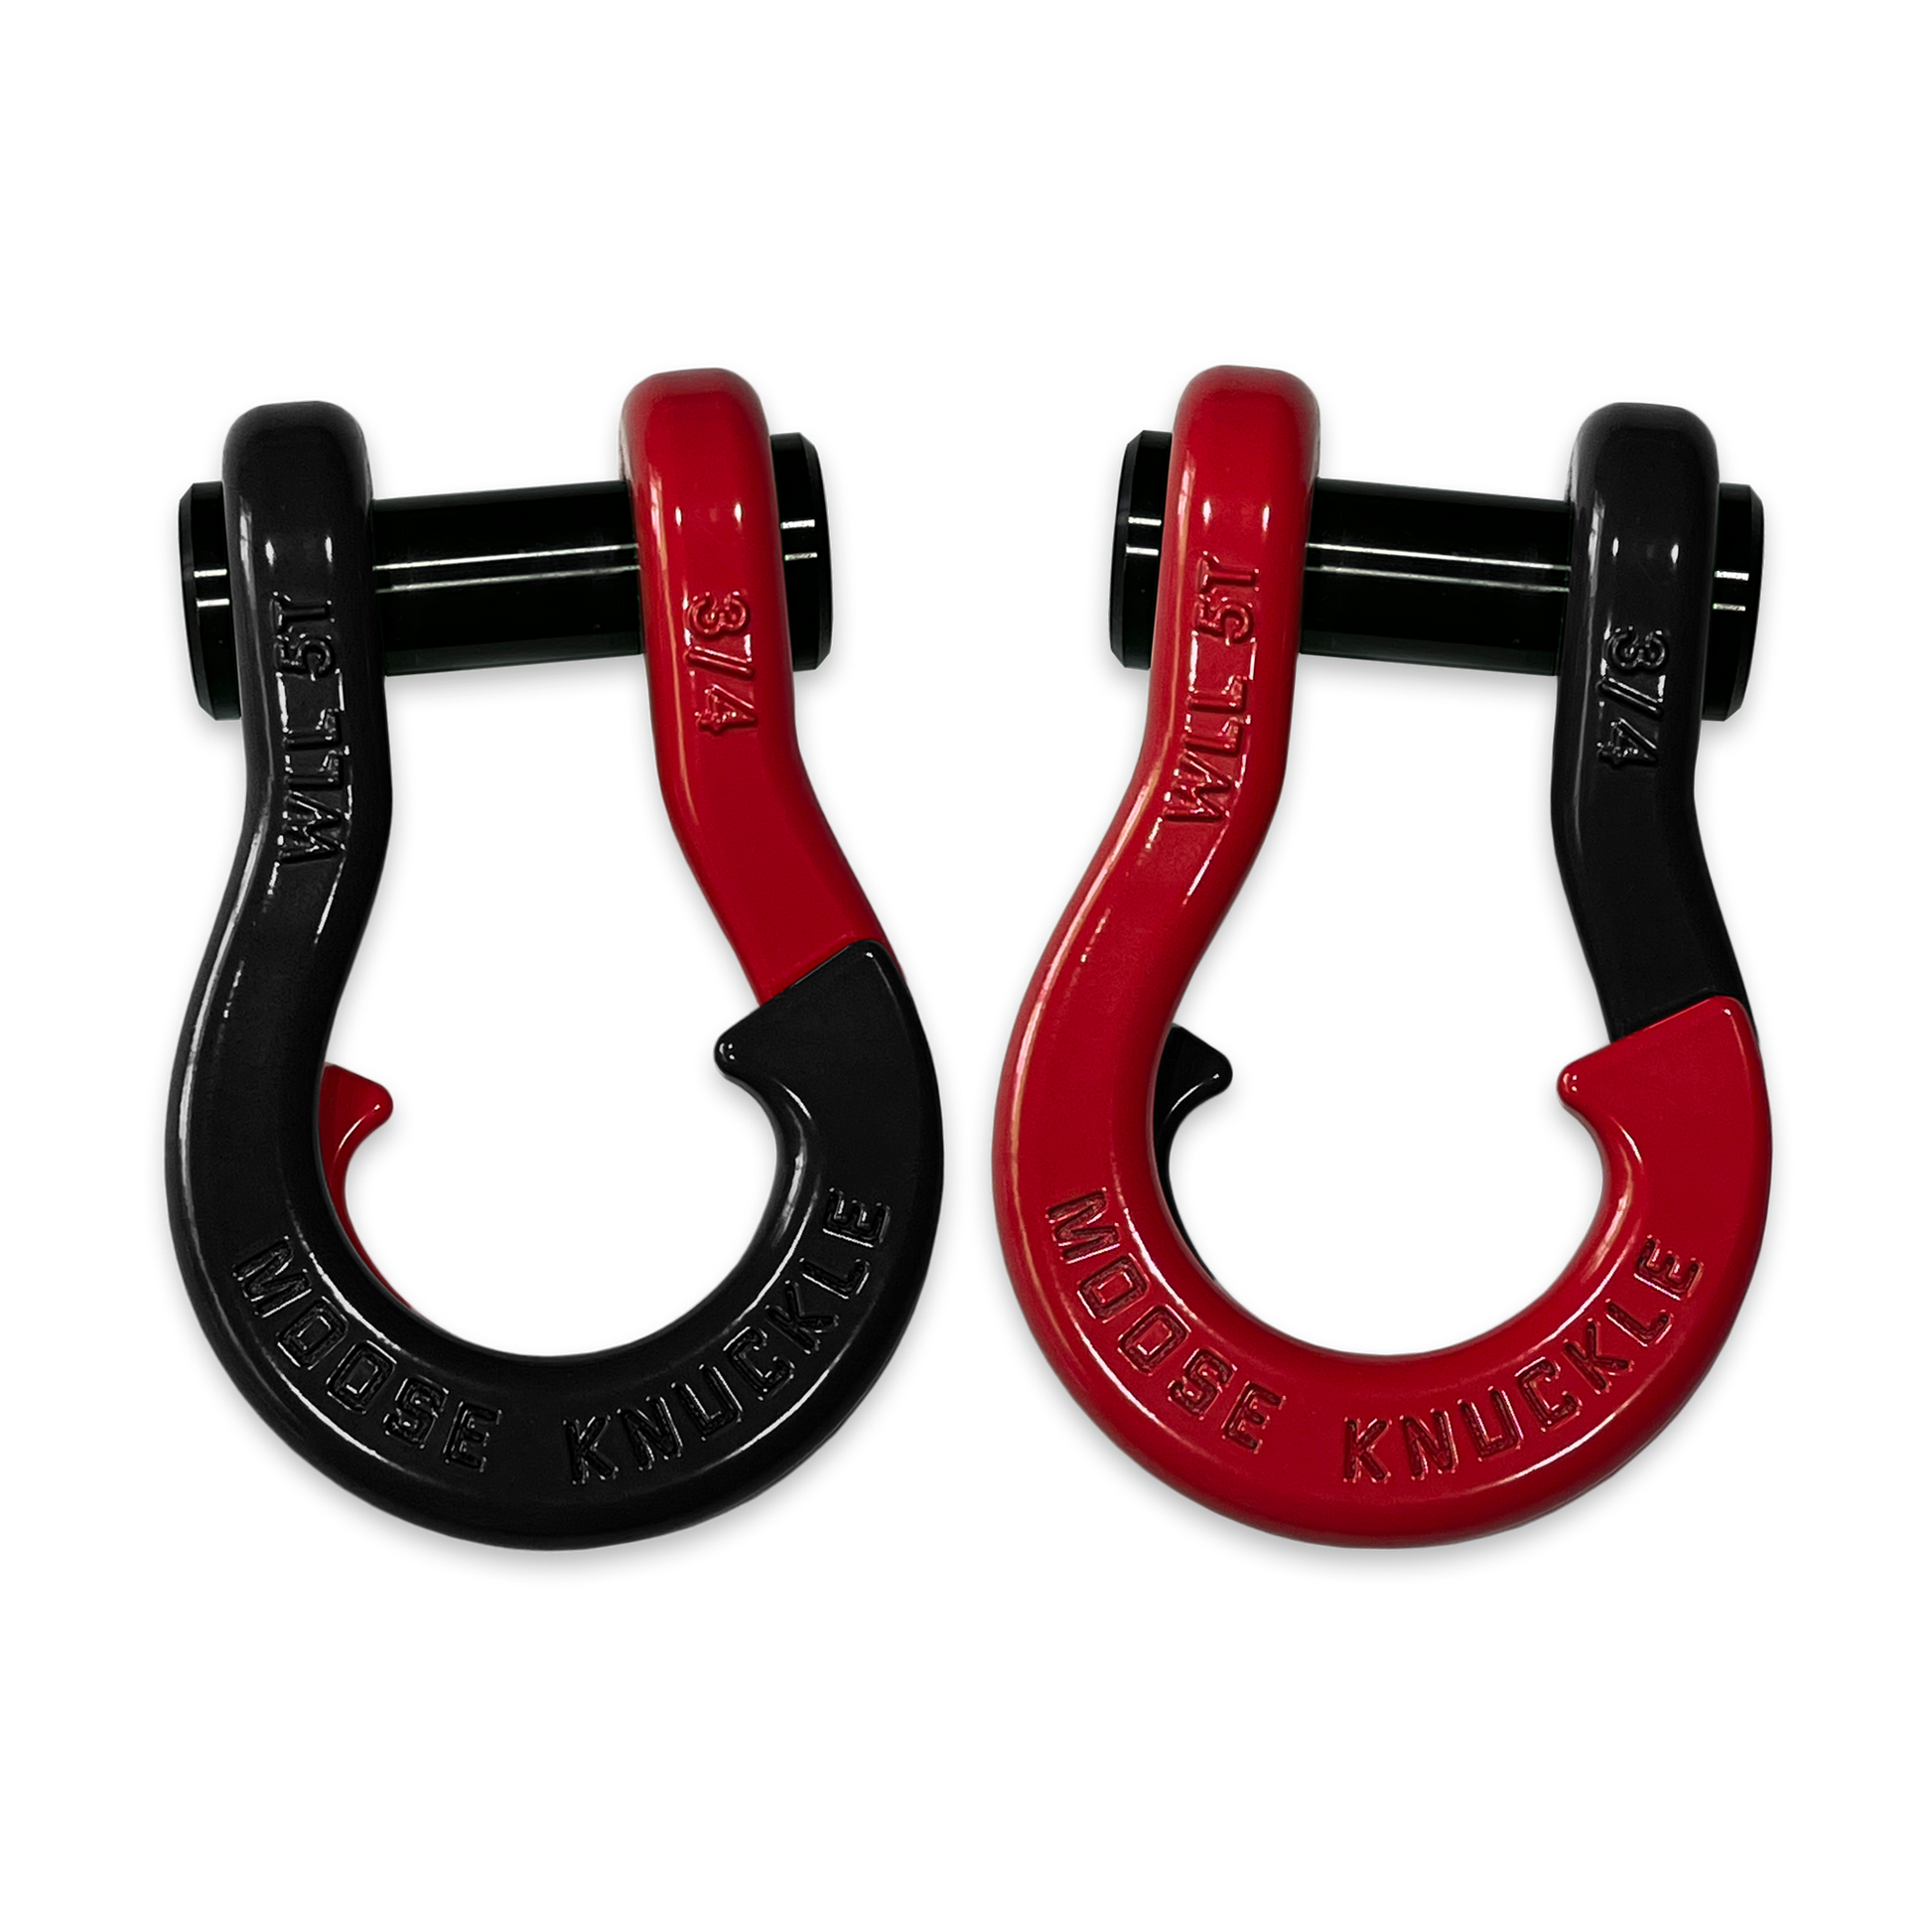 Moose Knuckle's Jowl Recovery Split Shackle 3/4 in Black Hole and Flame Red Combo